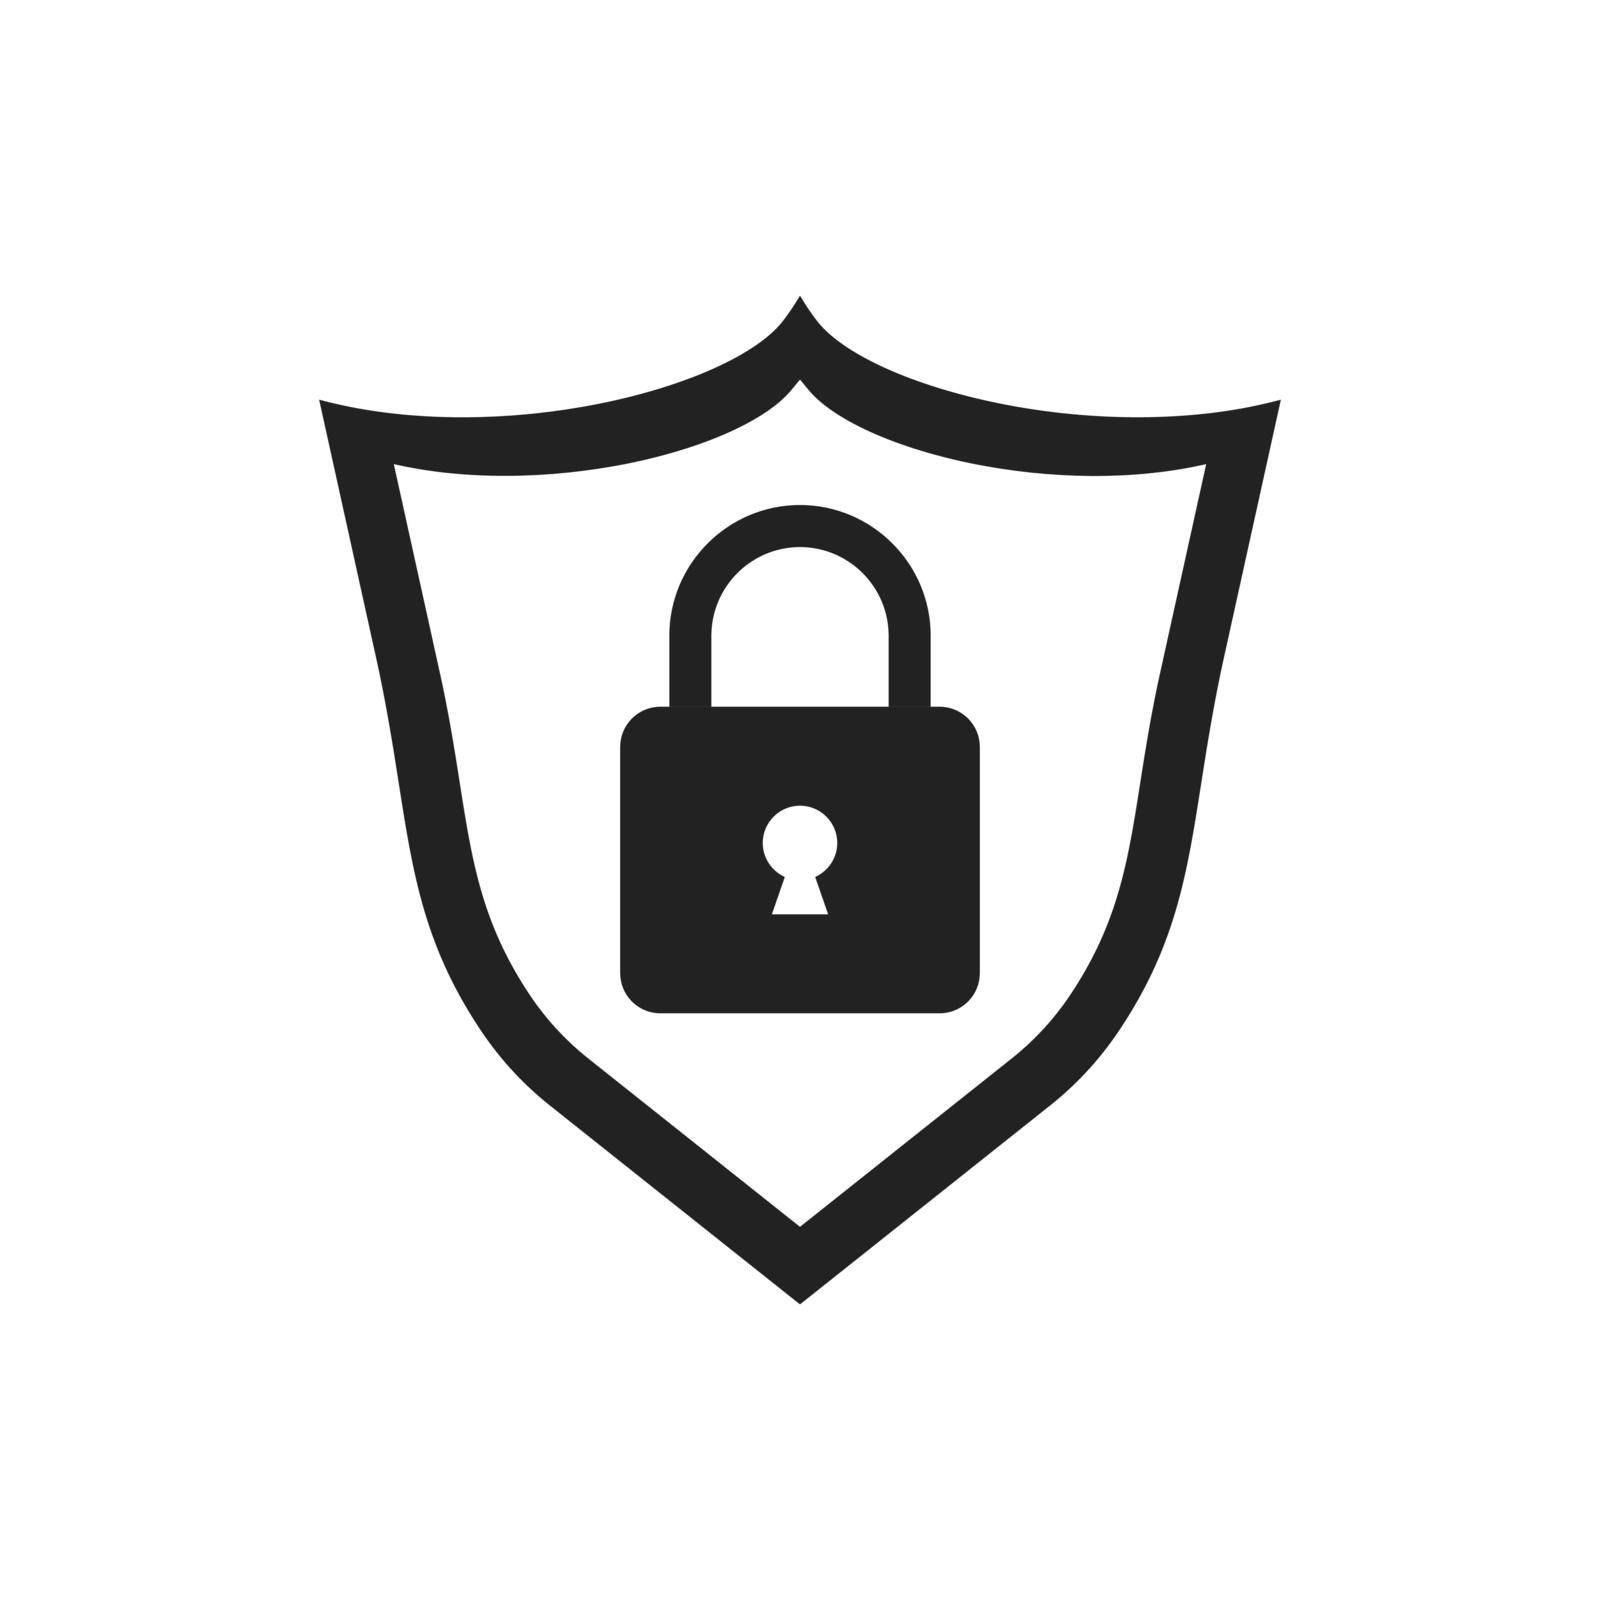 Lock with shield security icon. Vector illustration on white background. Business concept padlock pictogram. by LysenkoA